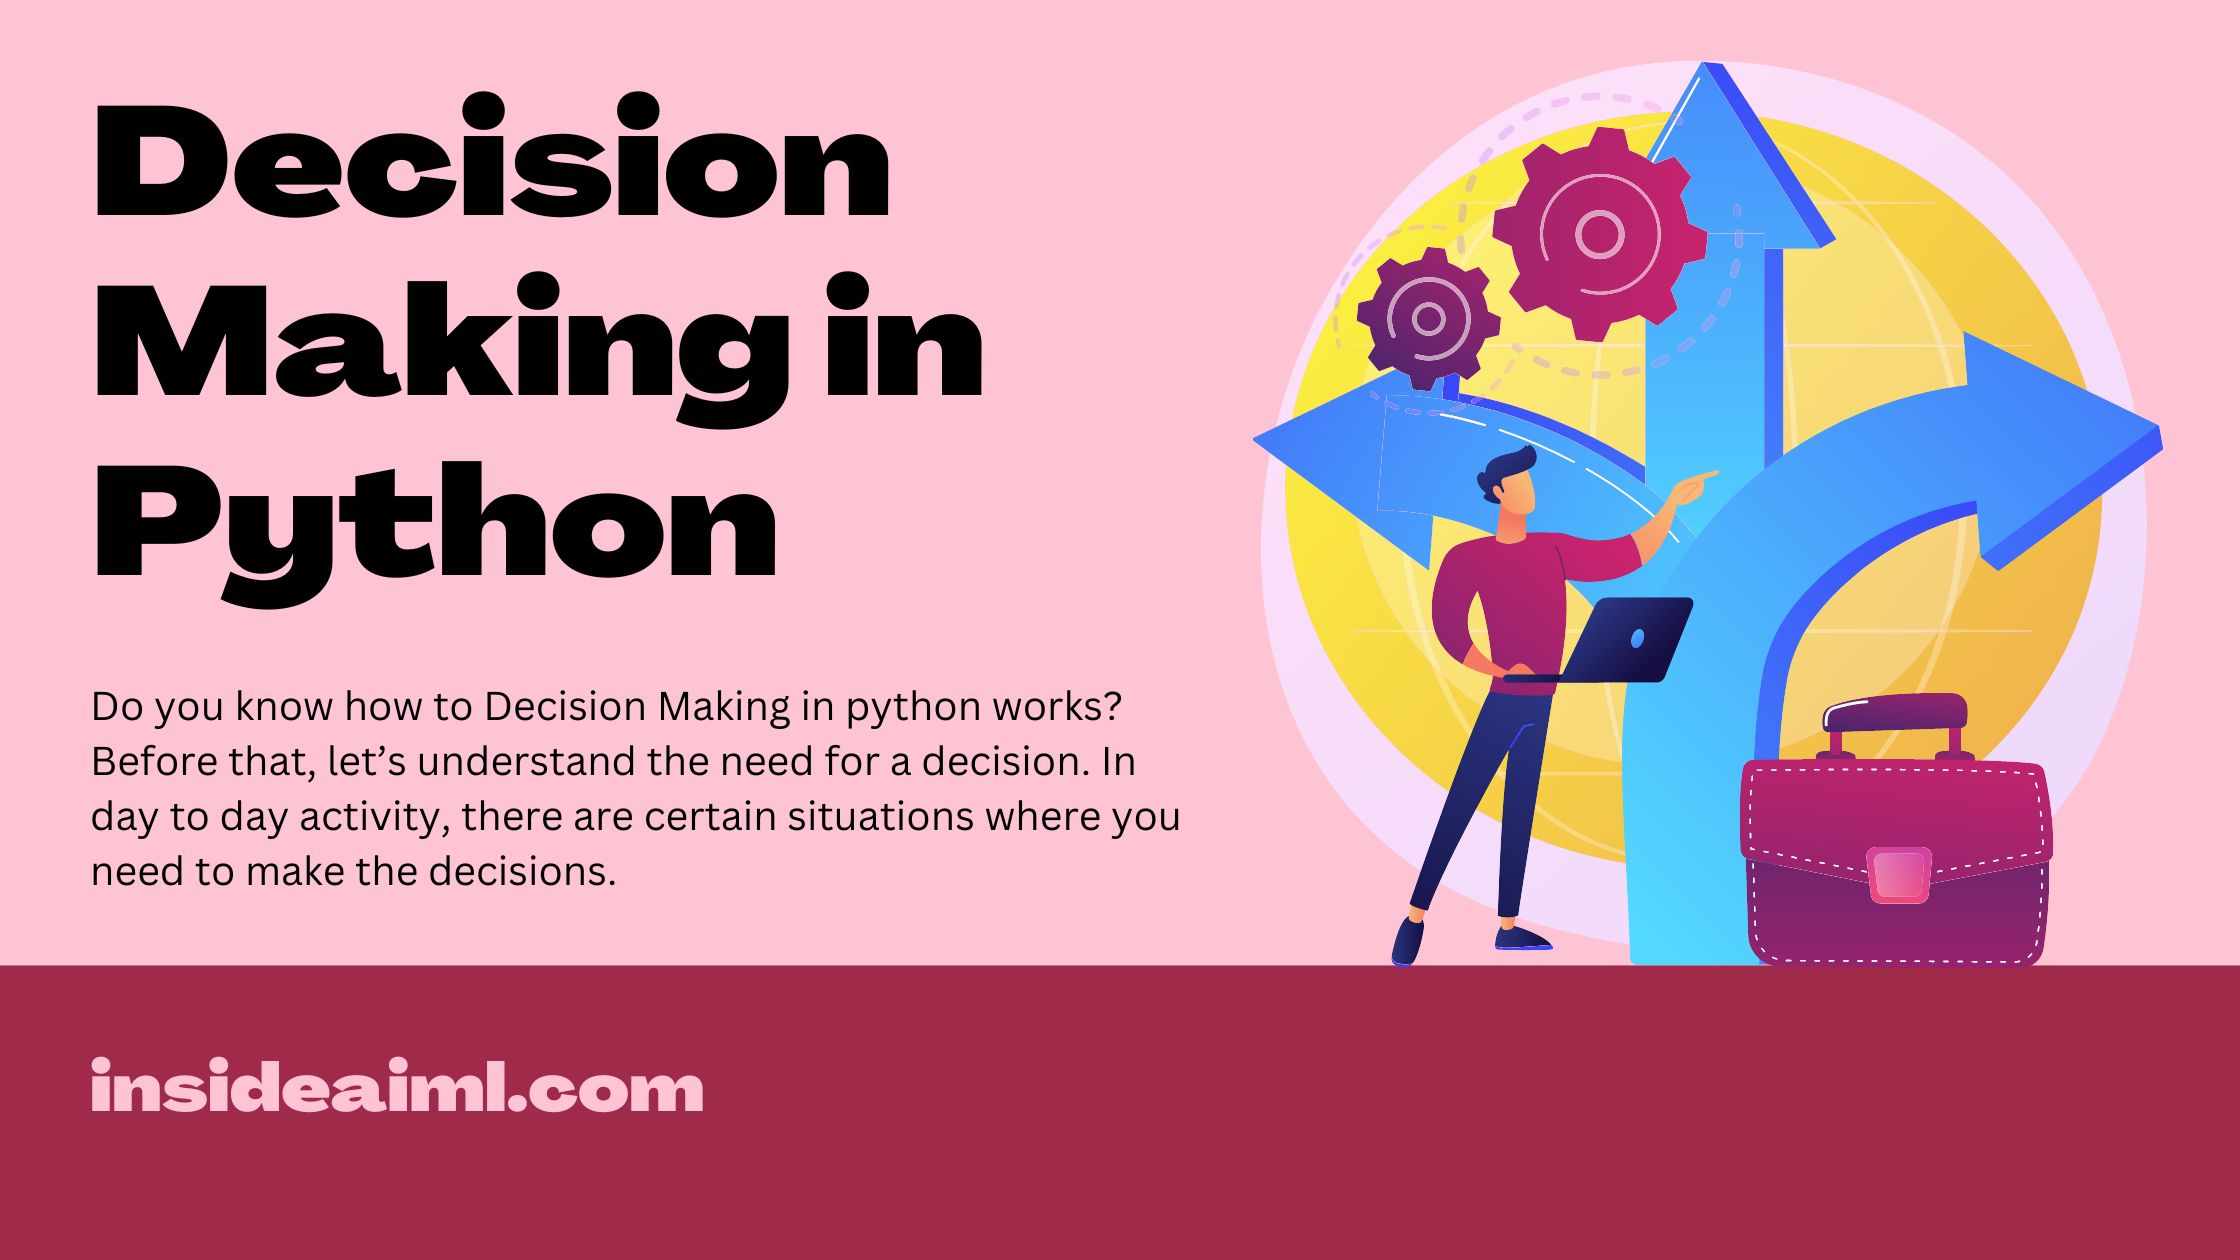 what’s the Decision Making in Python?